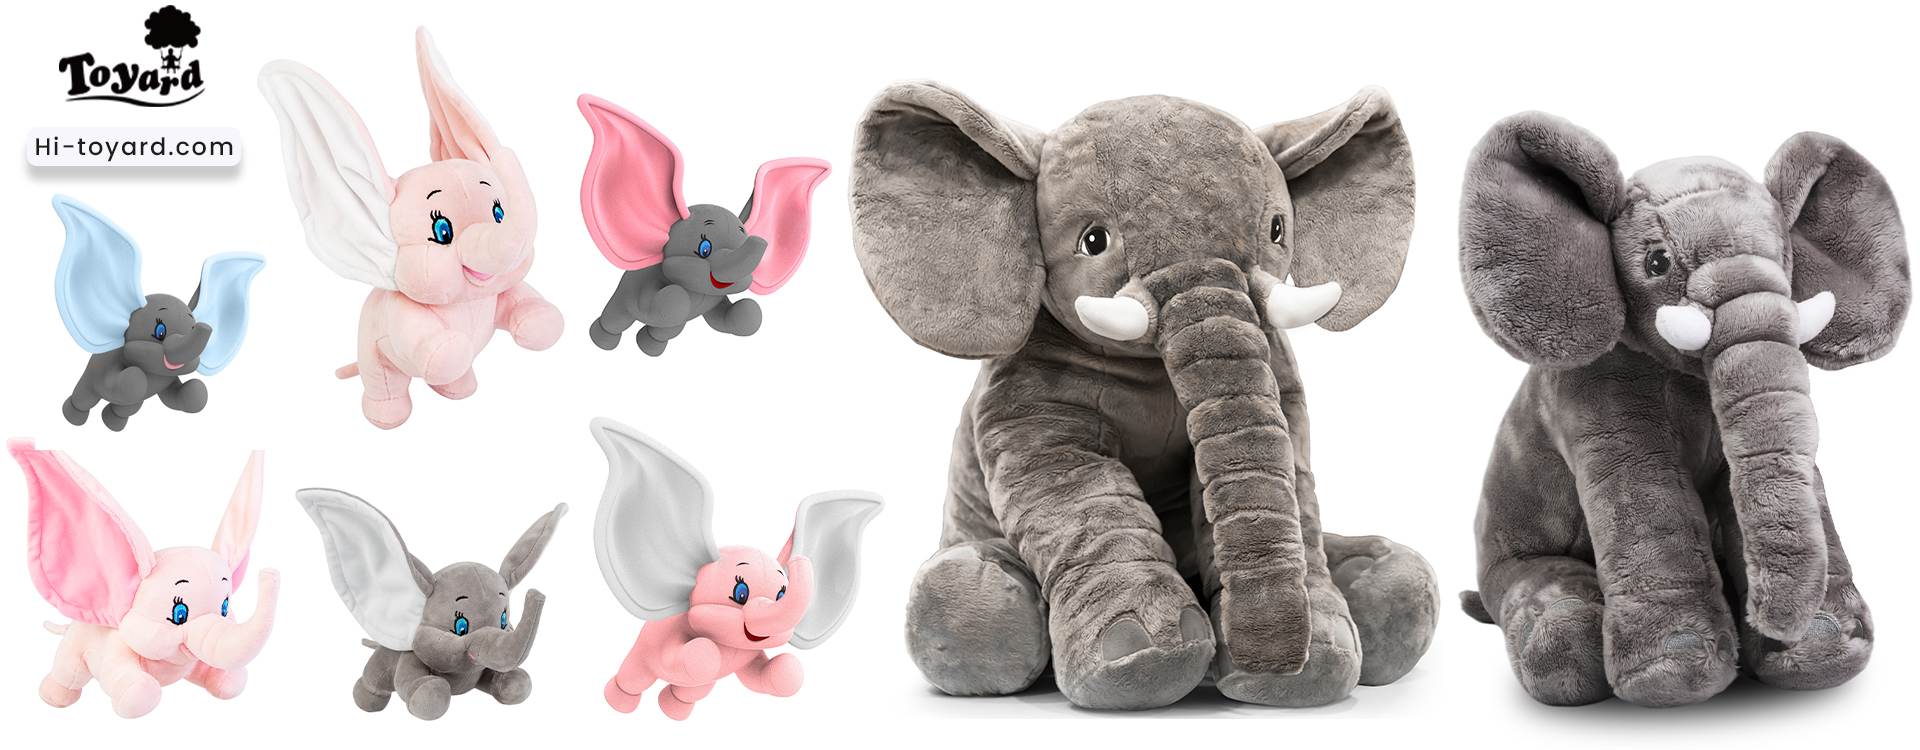 differnet size and color of best plush elephant toys